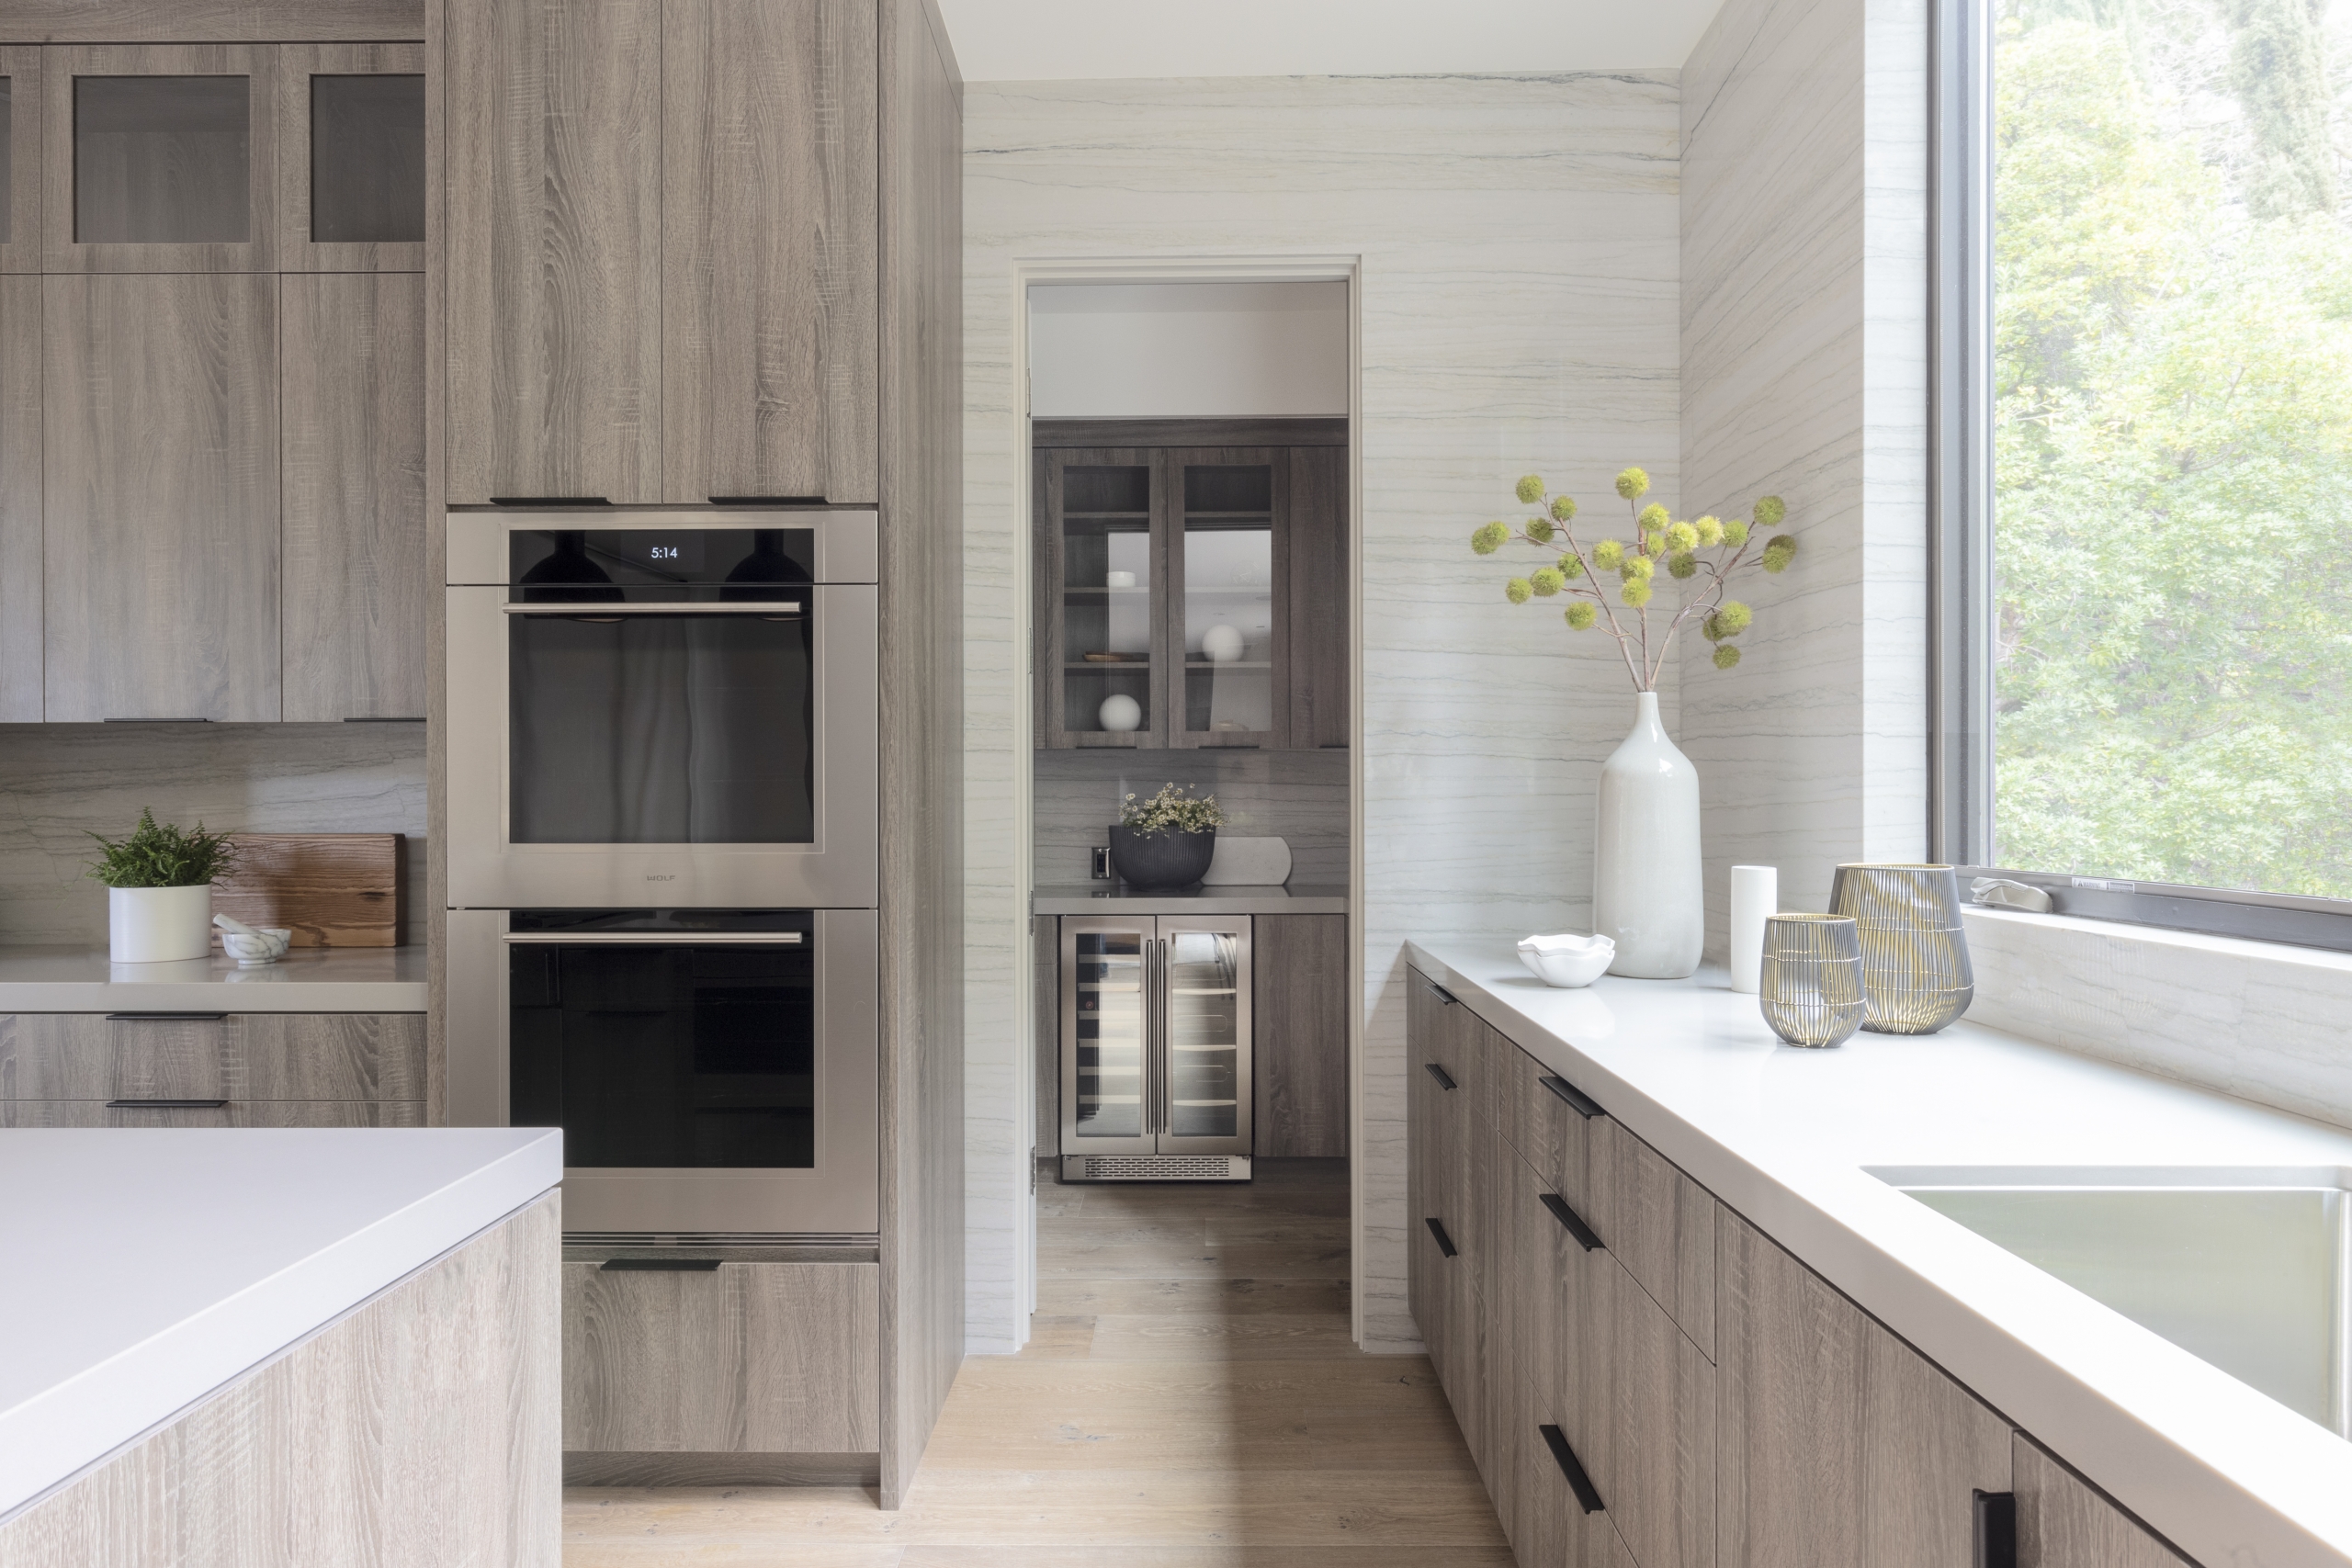 Modern kitchen pantry with double oven island